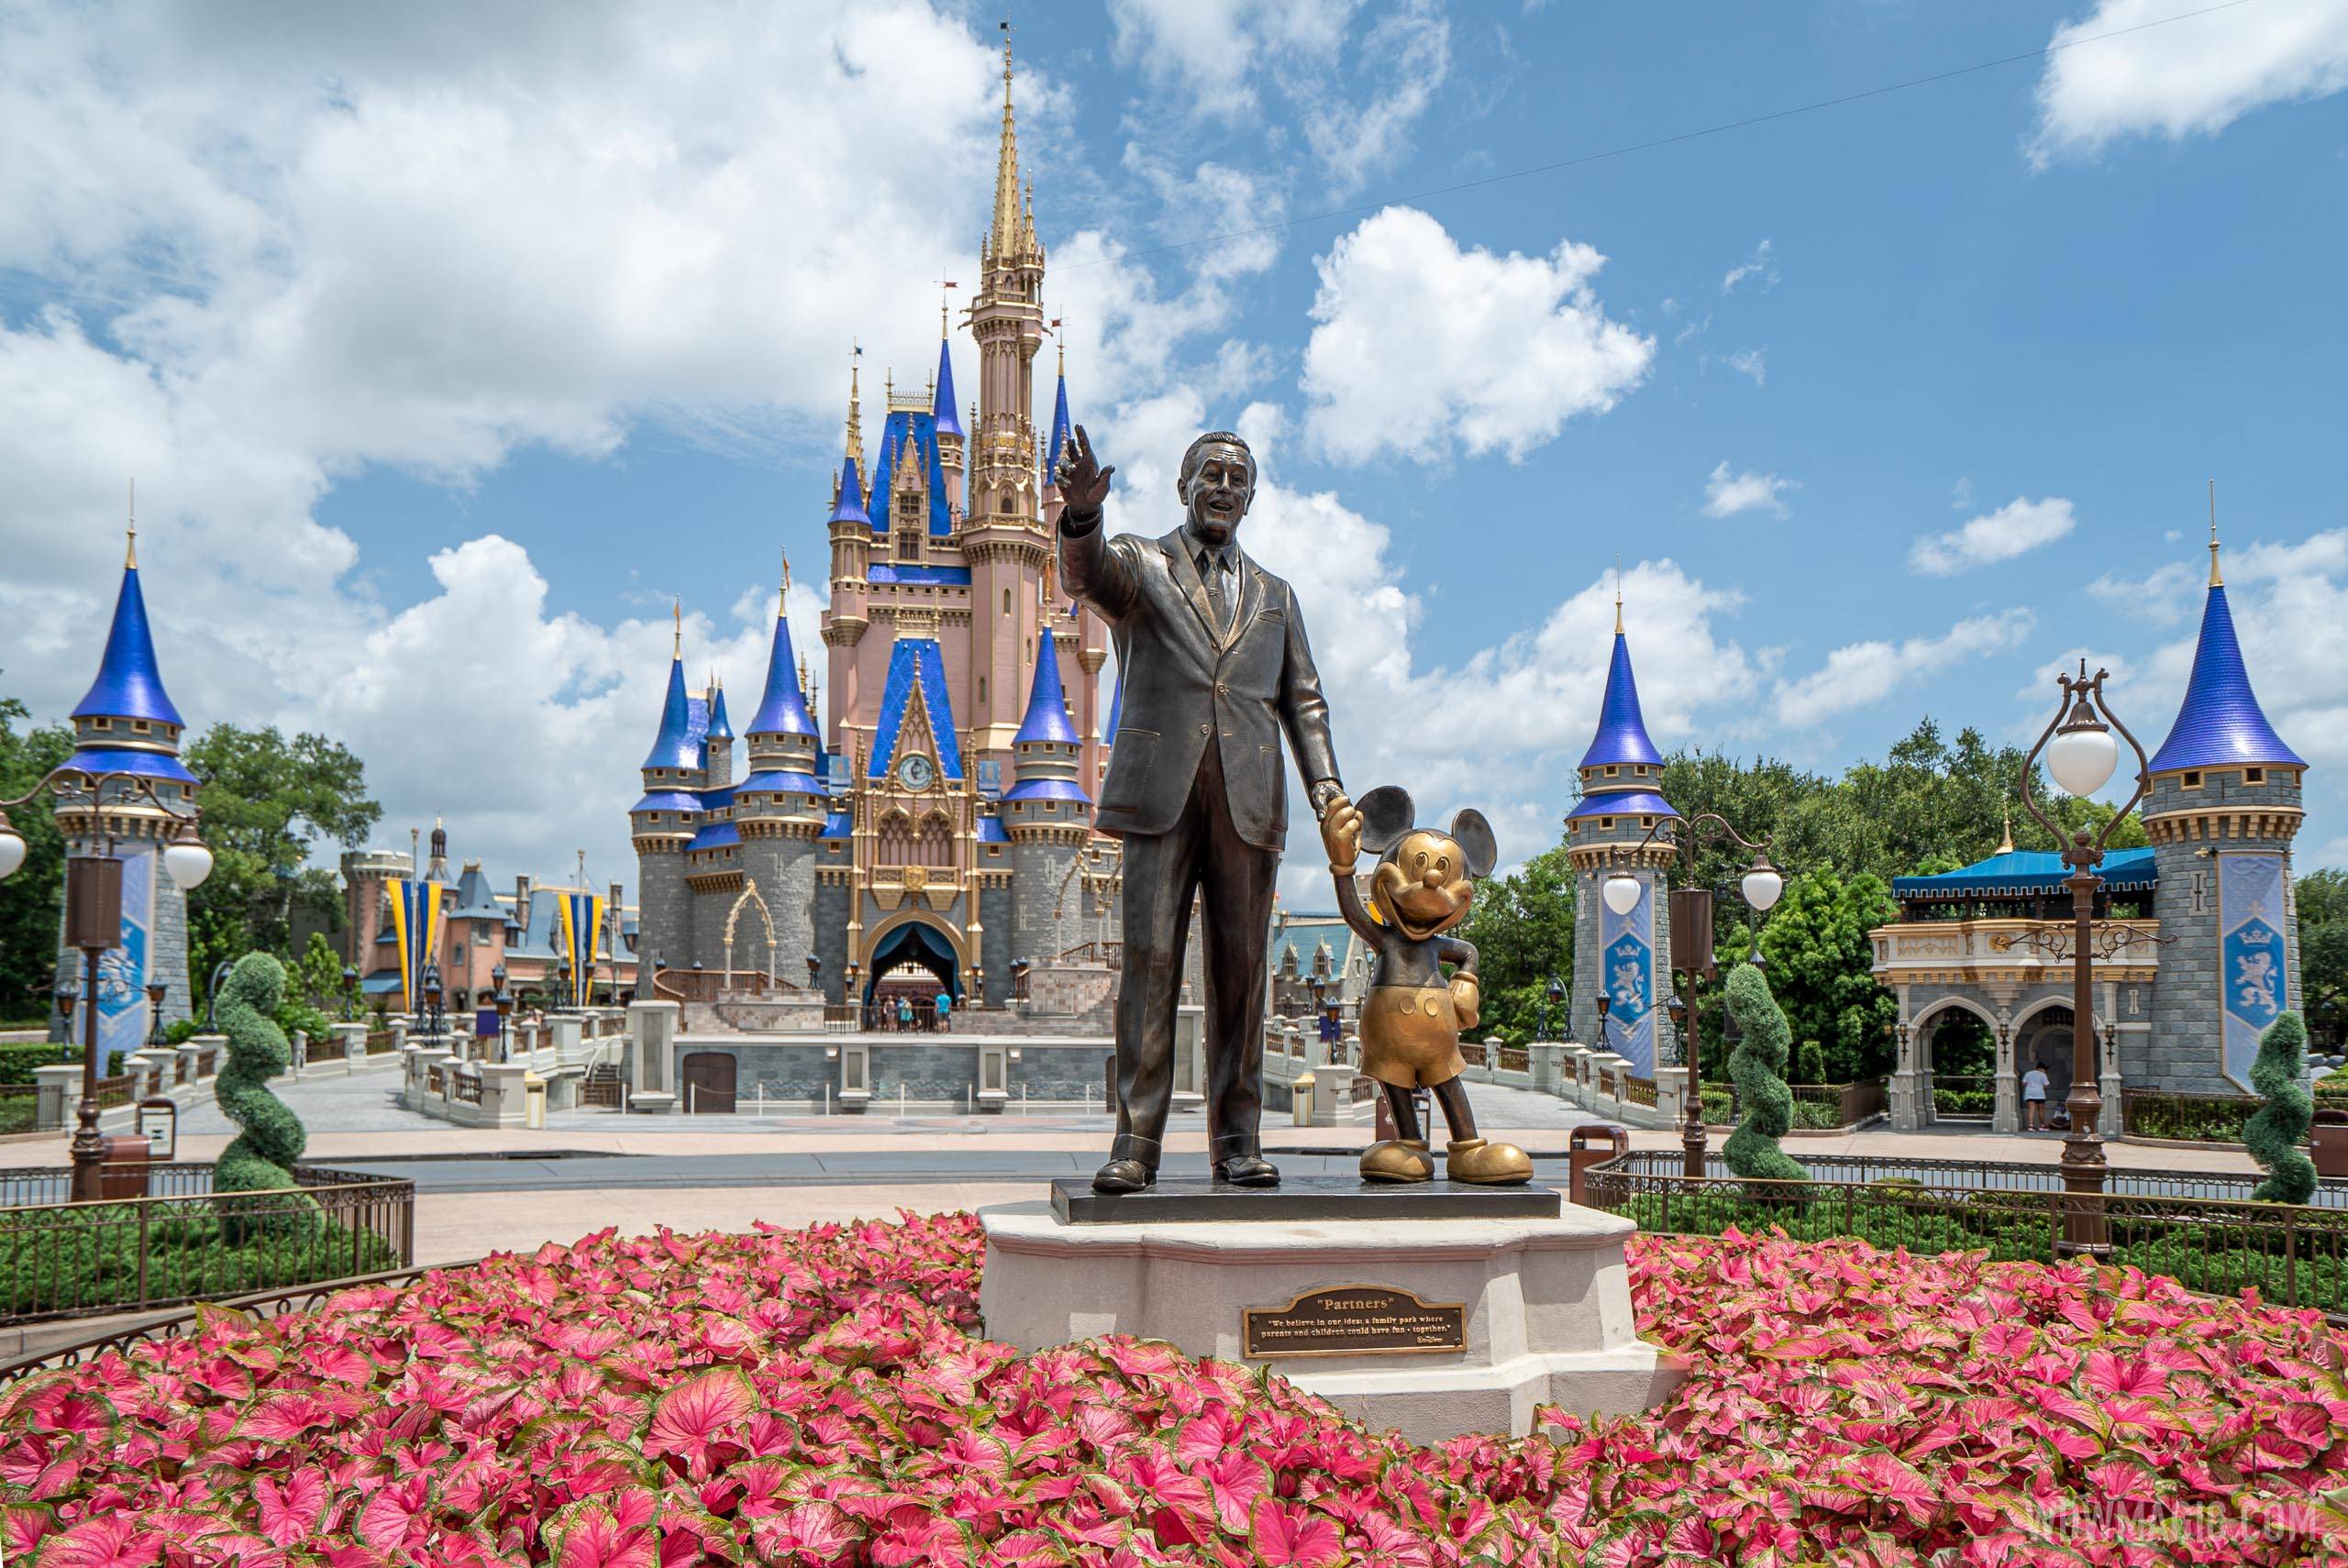 Theme park availability at Walt Disney World is reaching capacity on several dates over the Easter period